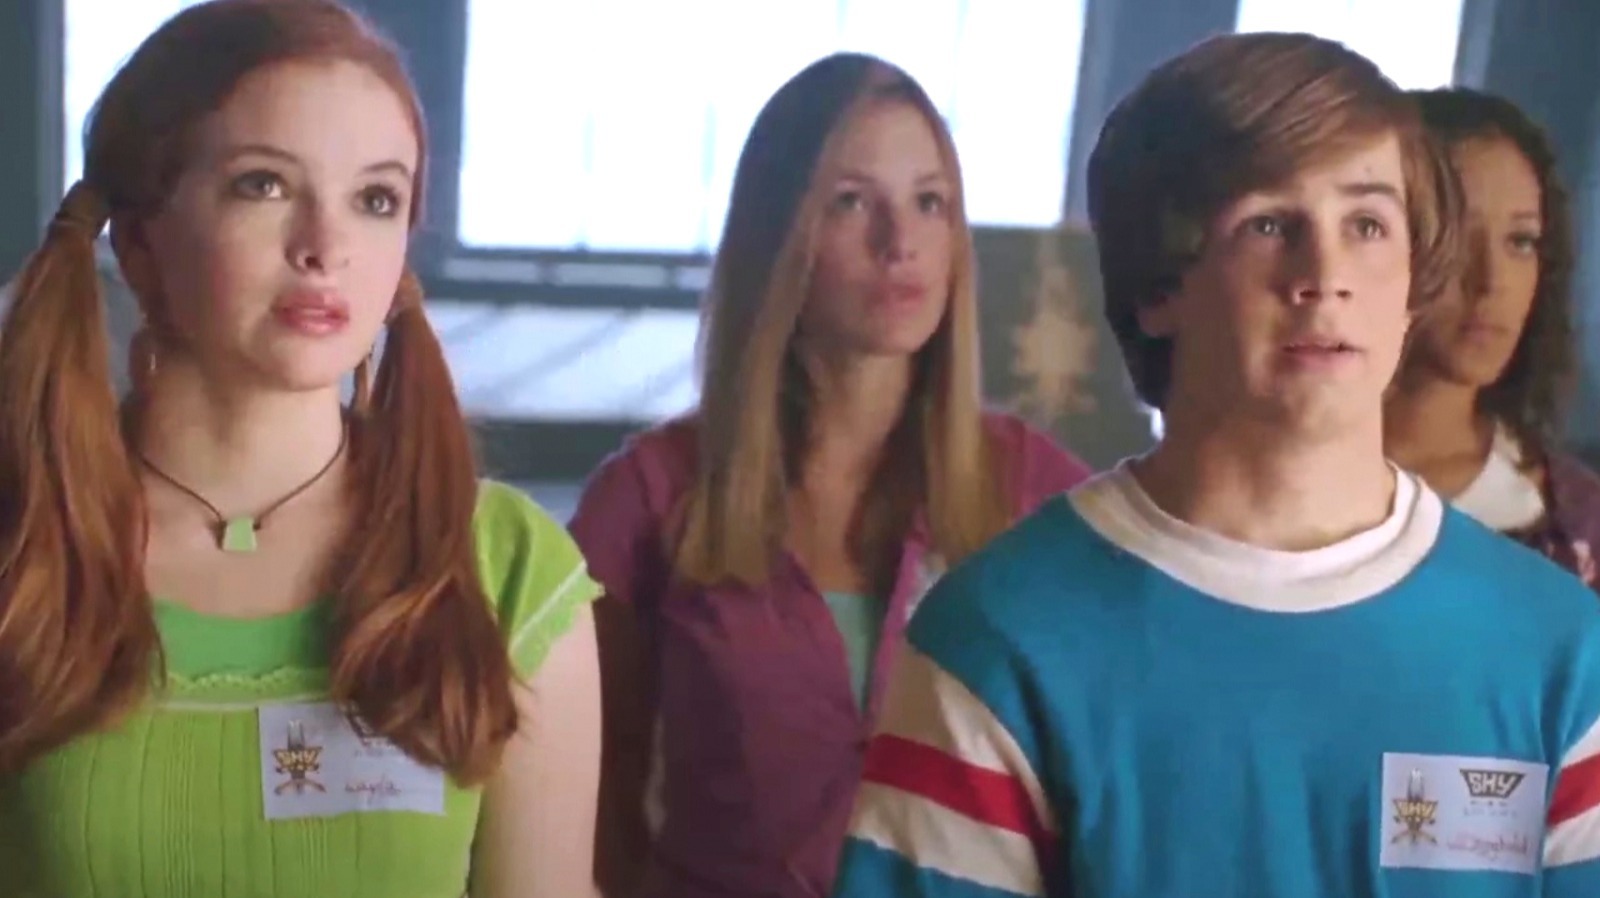 The Sky High Cast Has Gone On To More Superhero And SciFi Glory